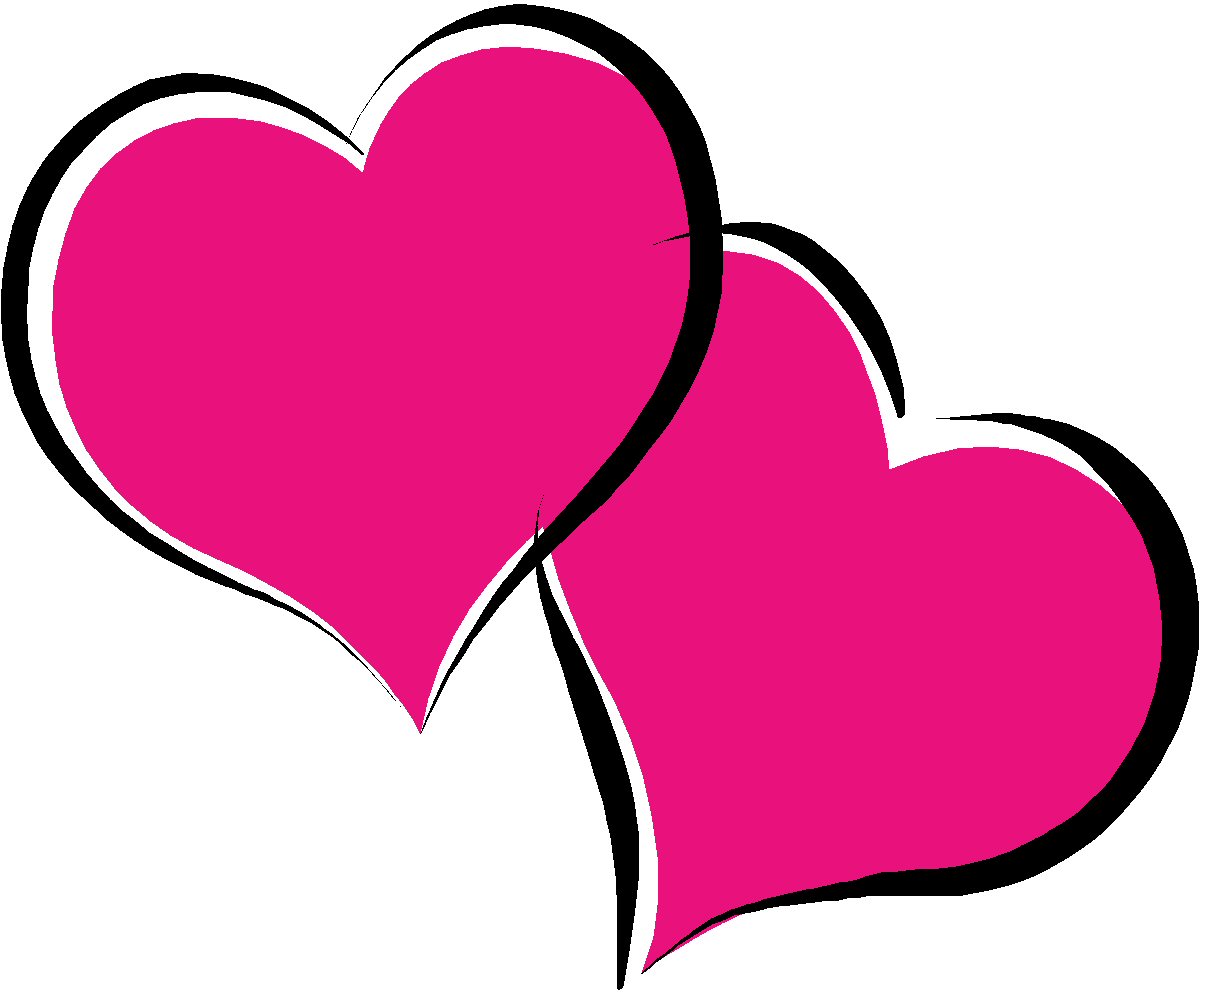 Bright pink heart background clipart